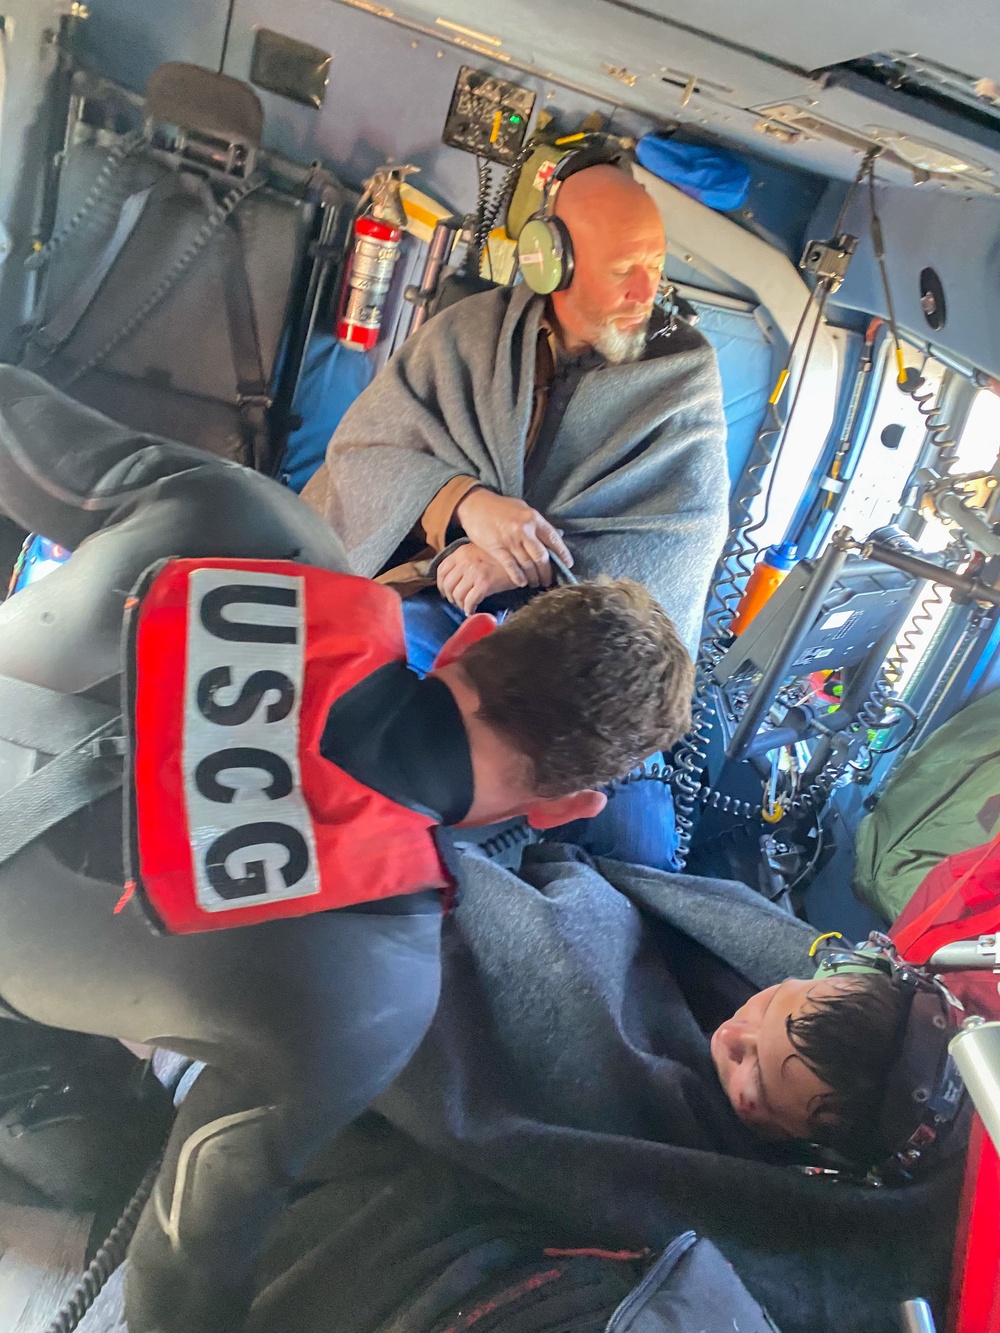 Coast Guard rescues three passengers from downed helicopter near Terrebonne Bay, La.